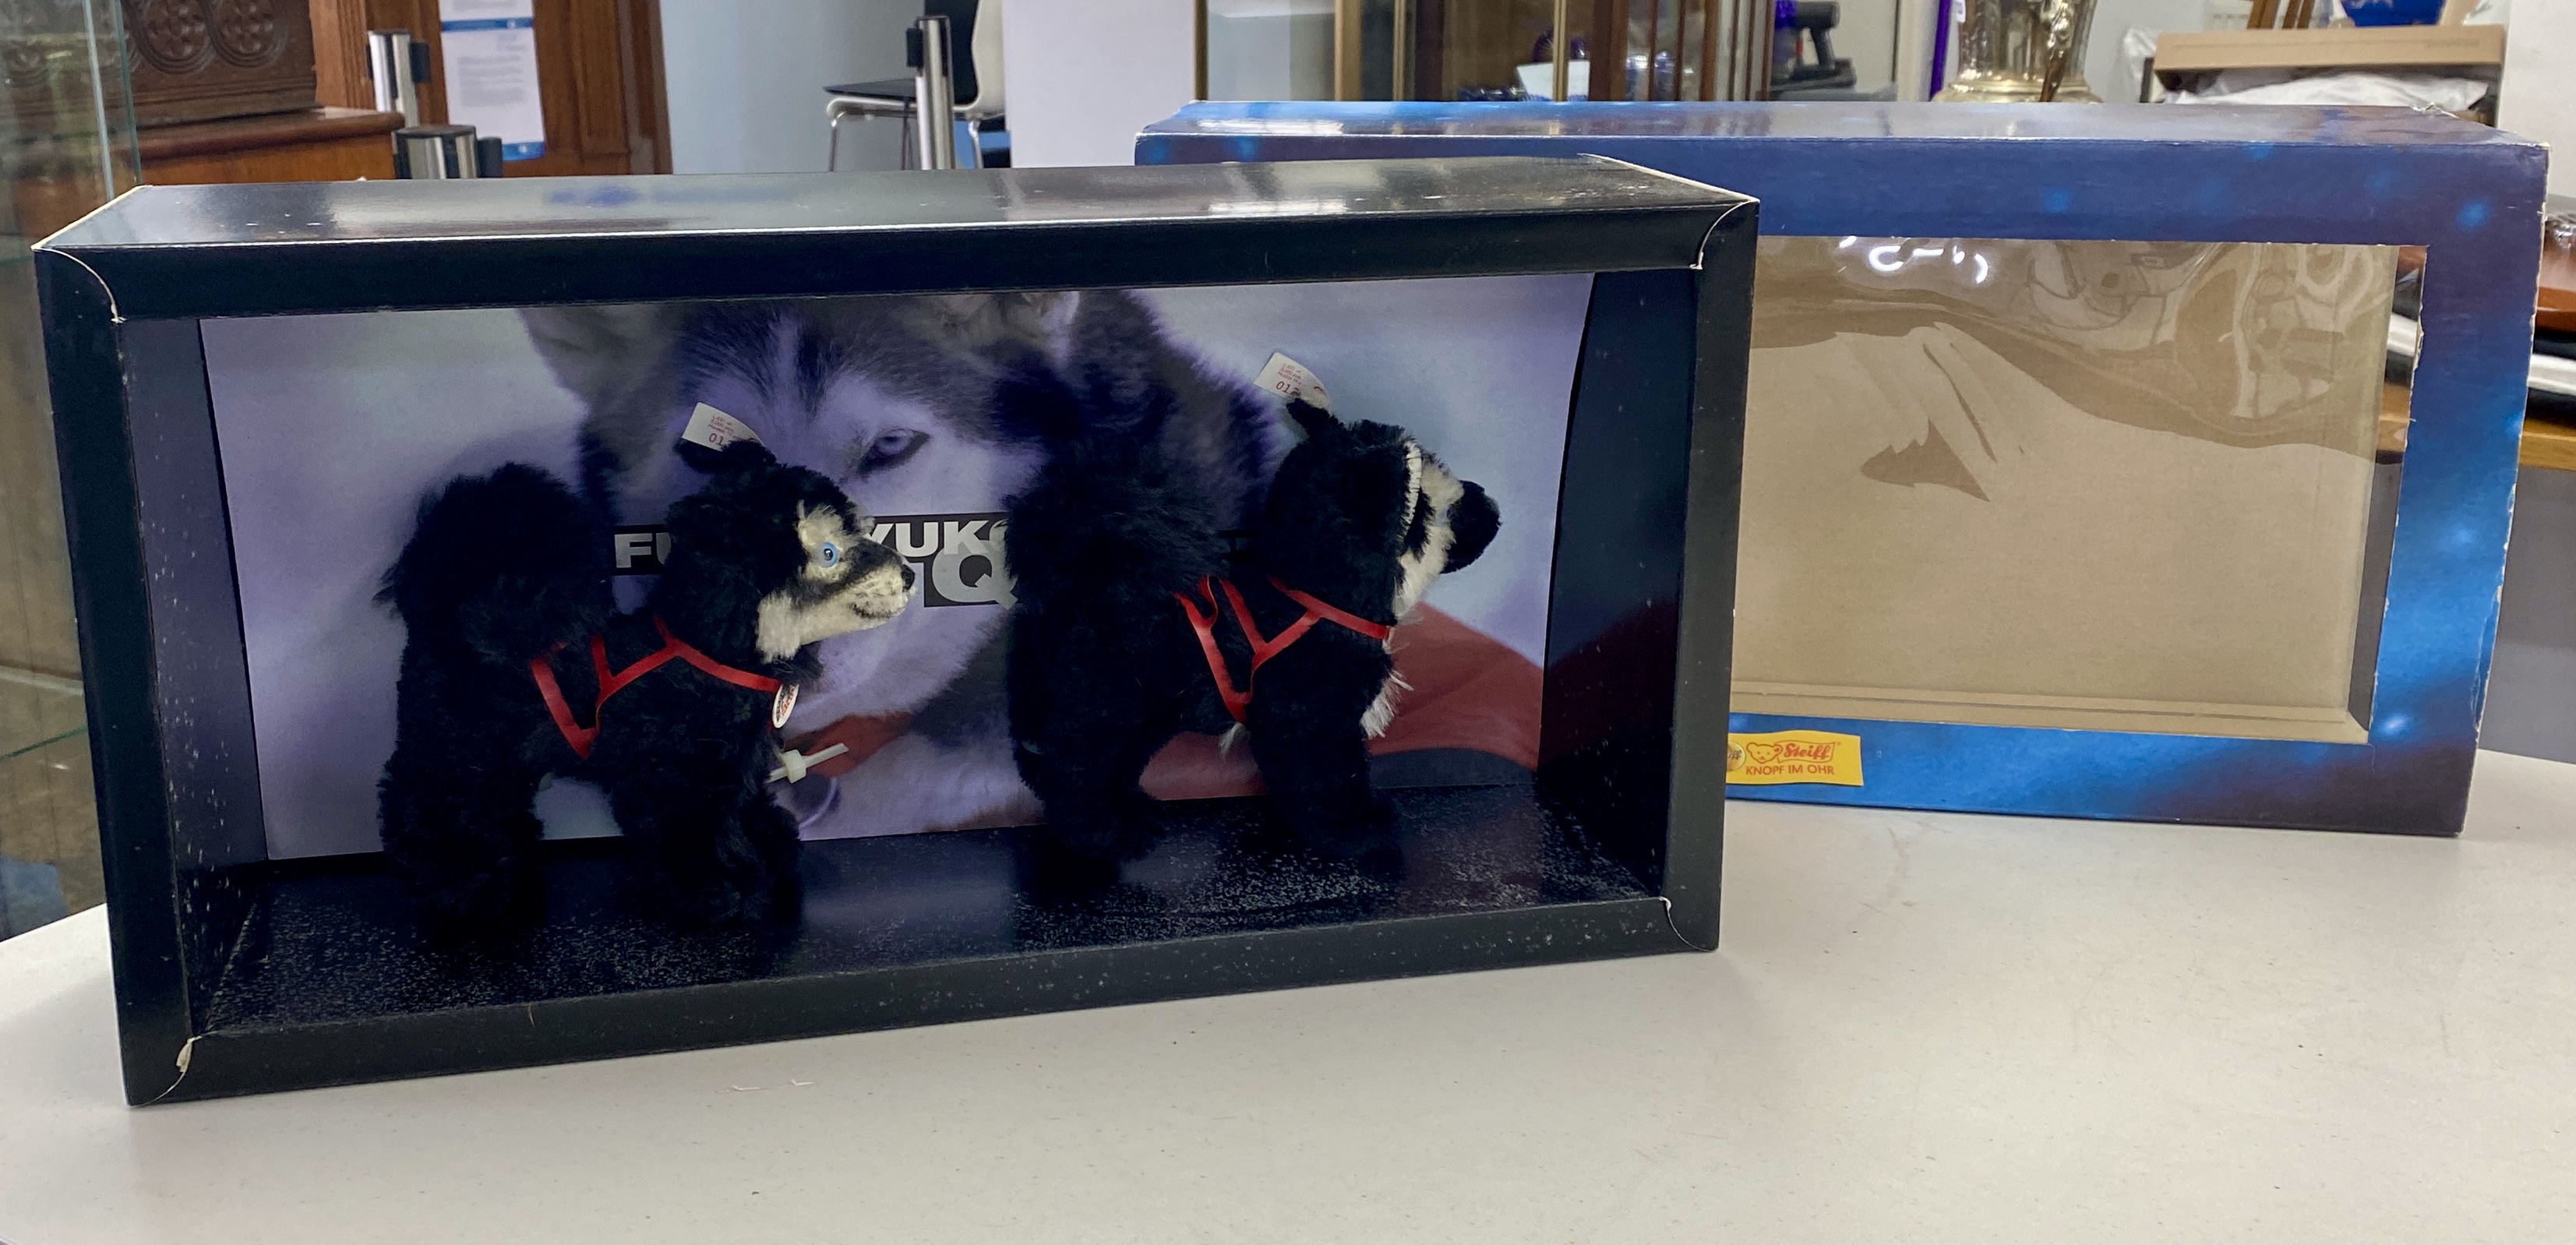 Steiff, two Huskies, edition 2000, boxed.